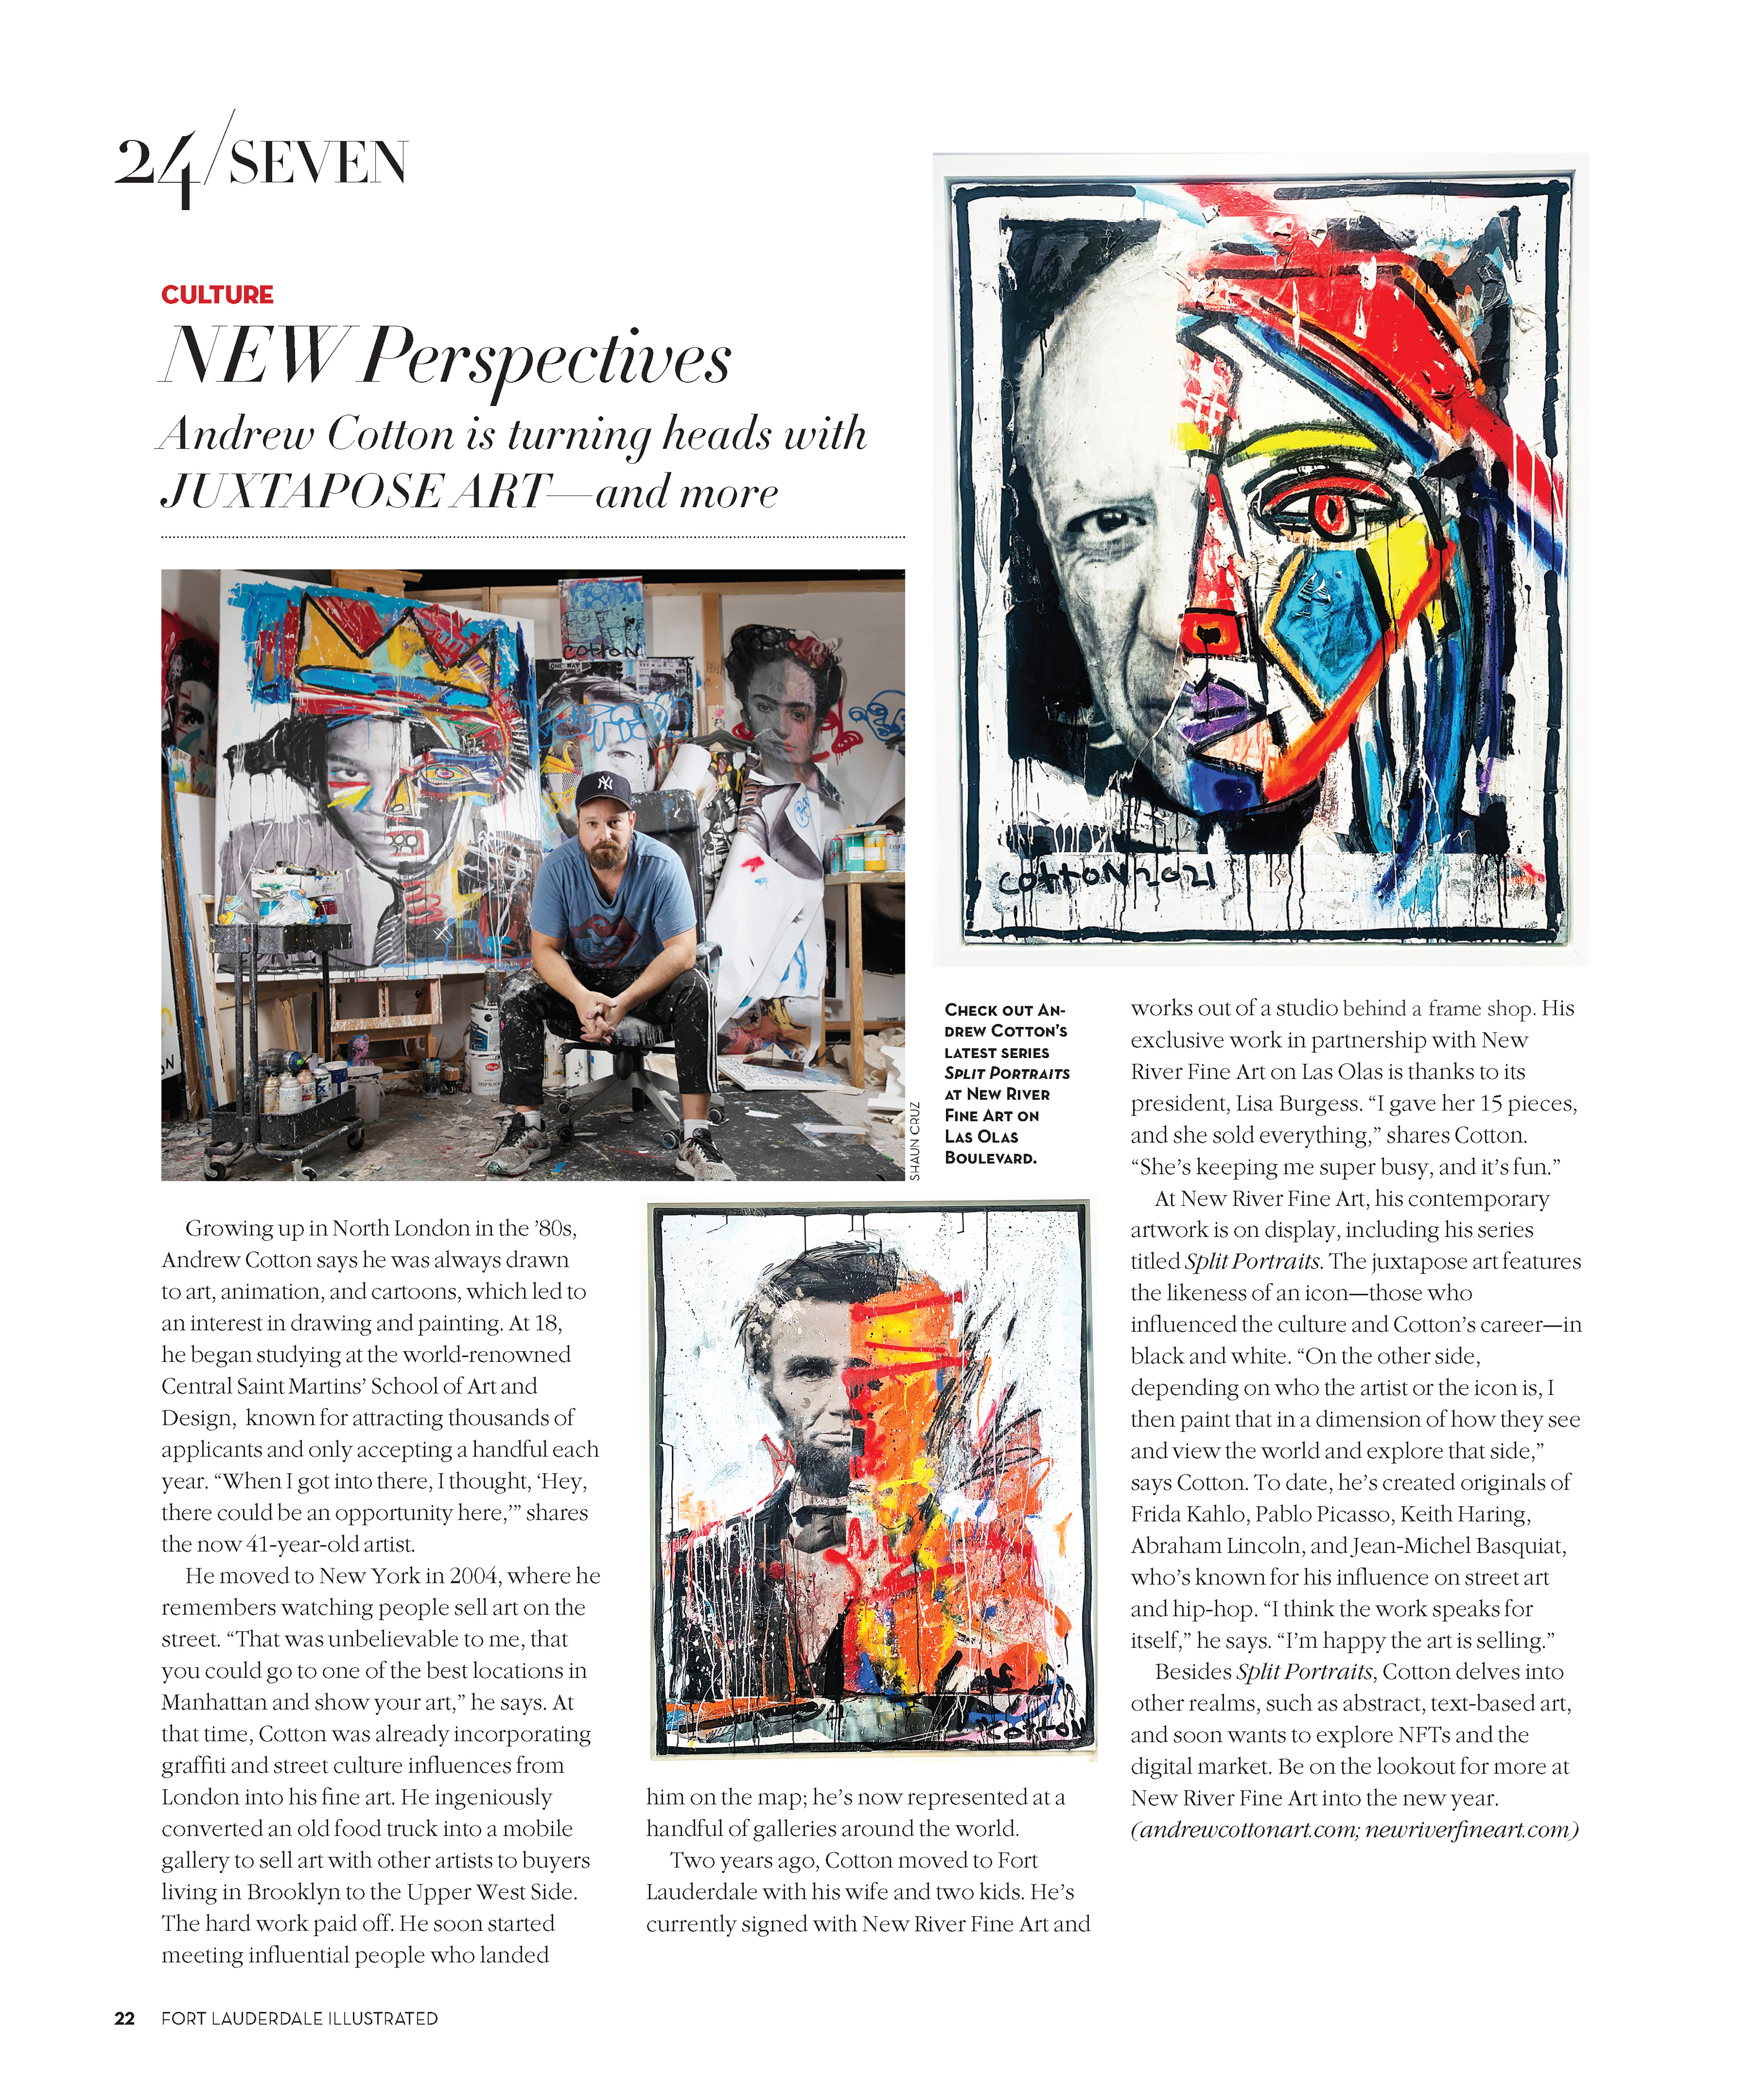 Andrew Cotton in his studio with a screenshot of his article in Fort Lauderdale Illustrated magazine